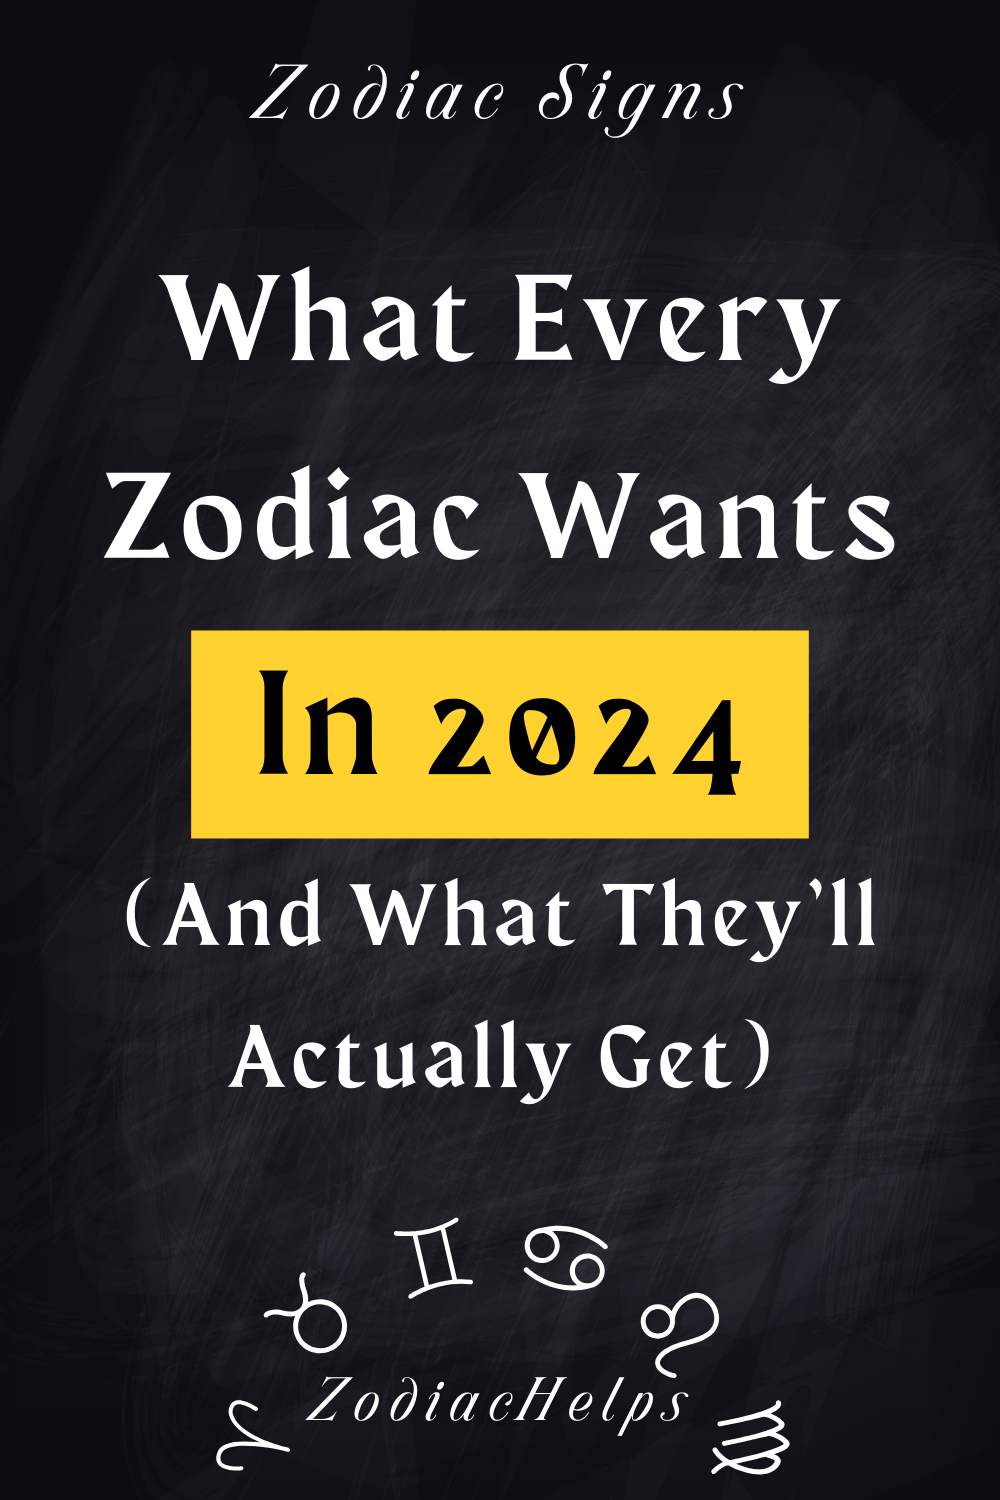 What Every Zodiac Wants In 2024 (And What They’ll Actually Get)